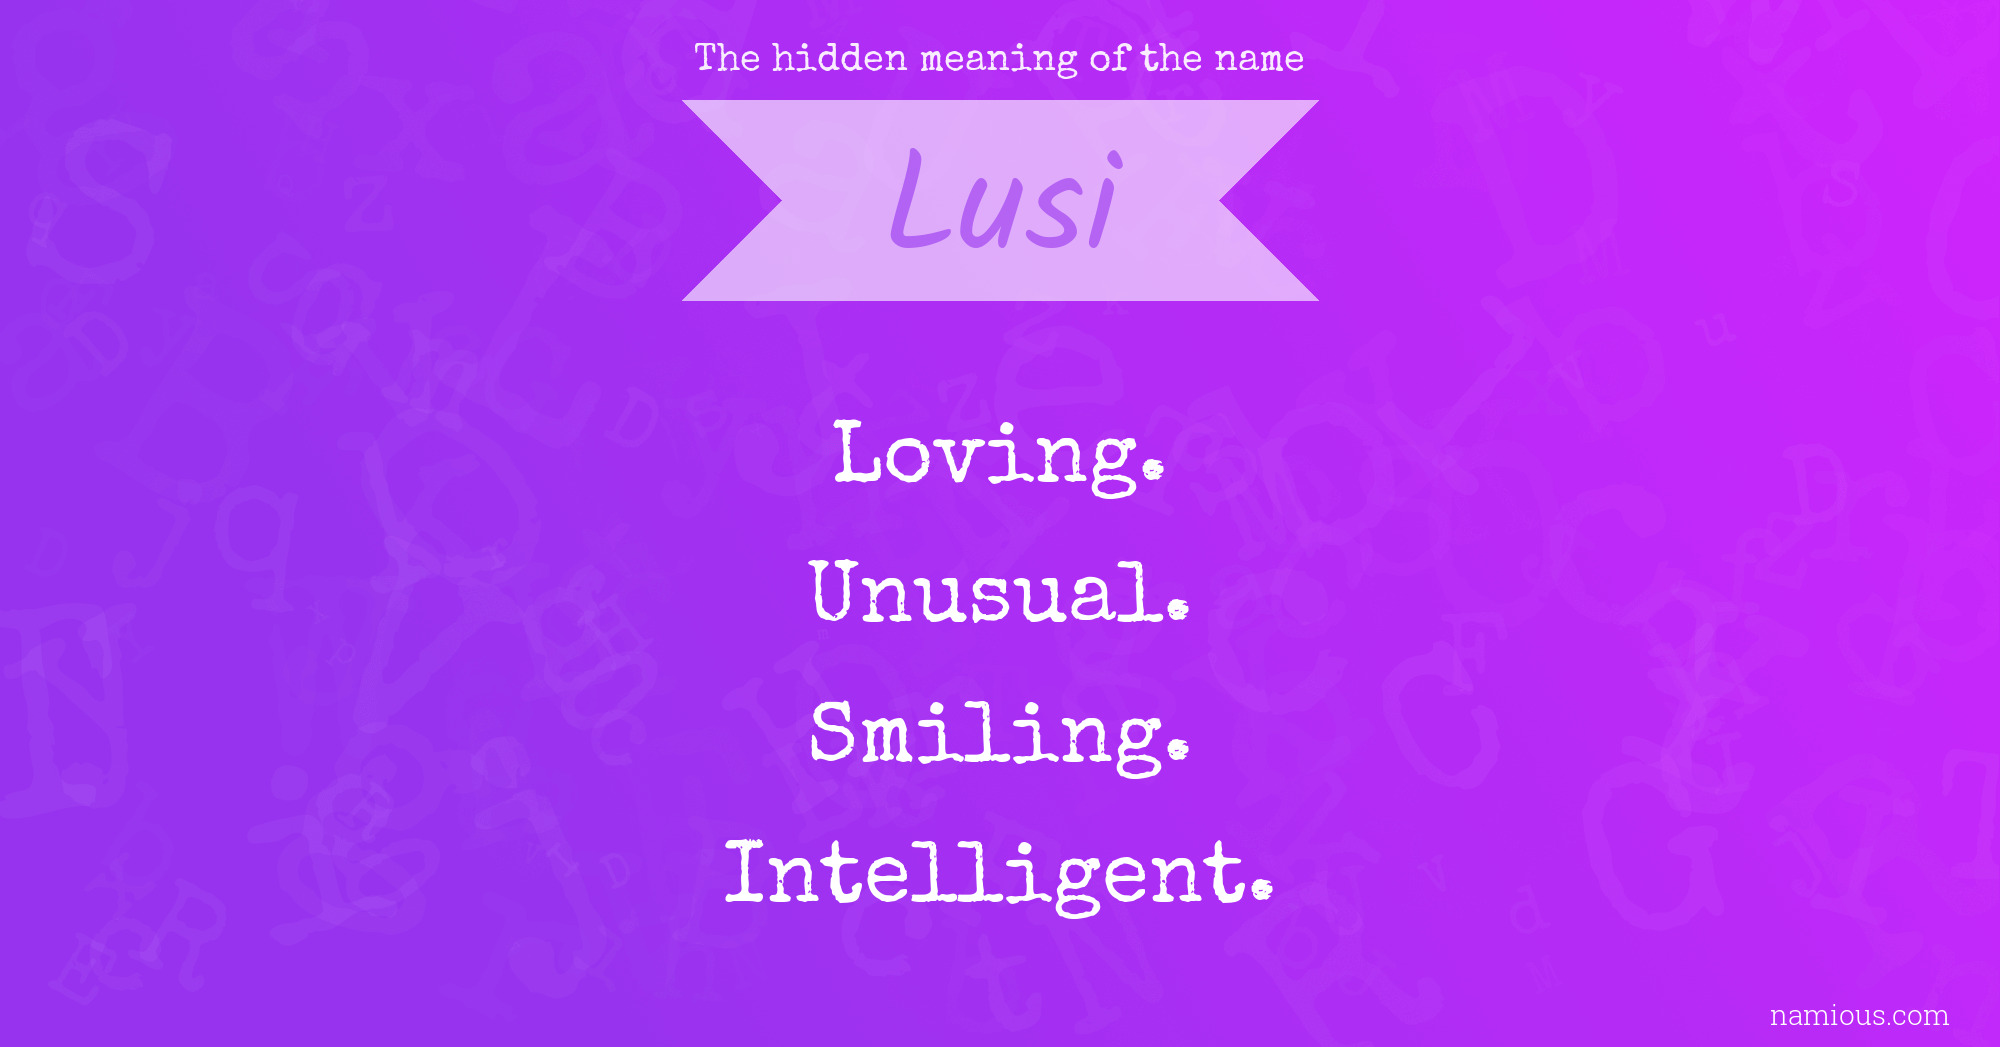 The hidden meaning of the name Lusi